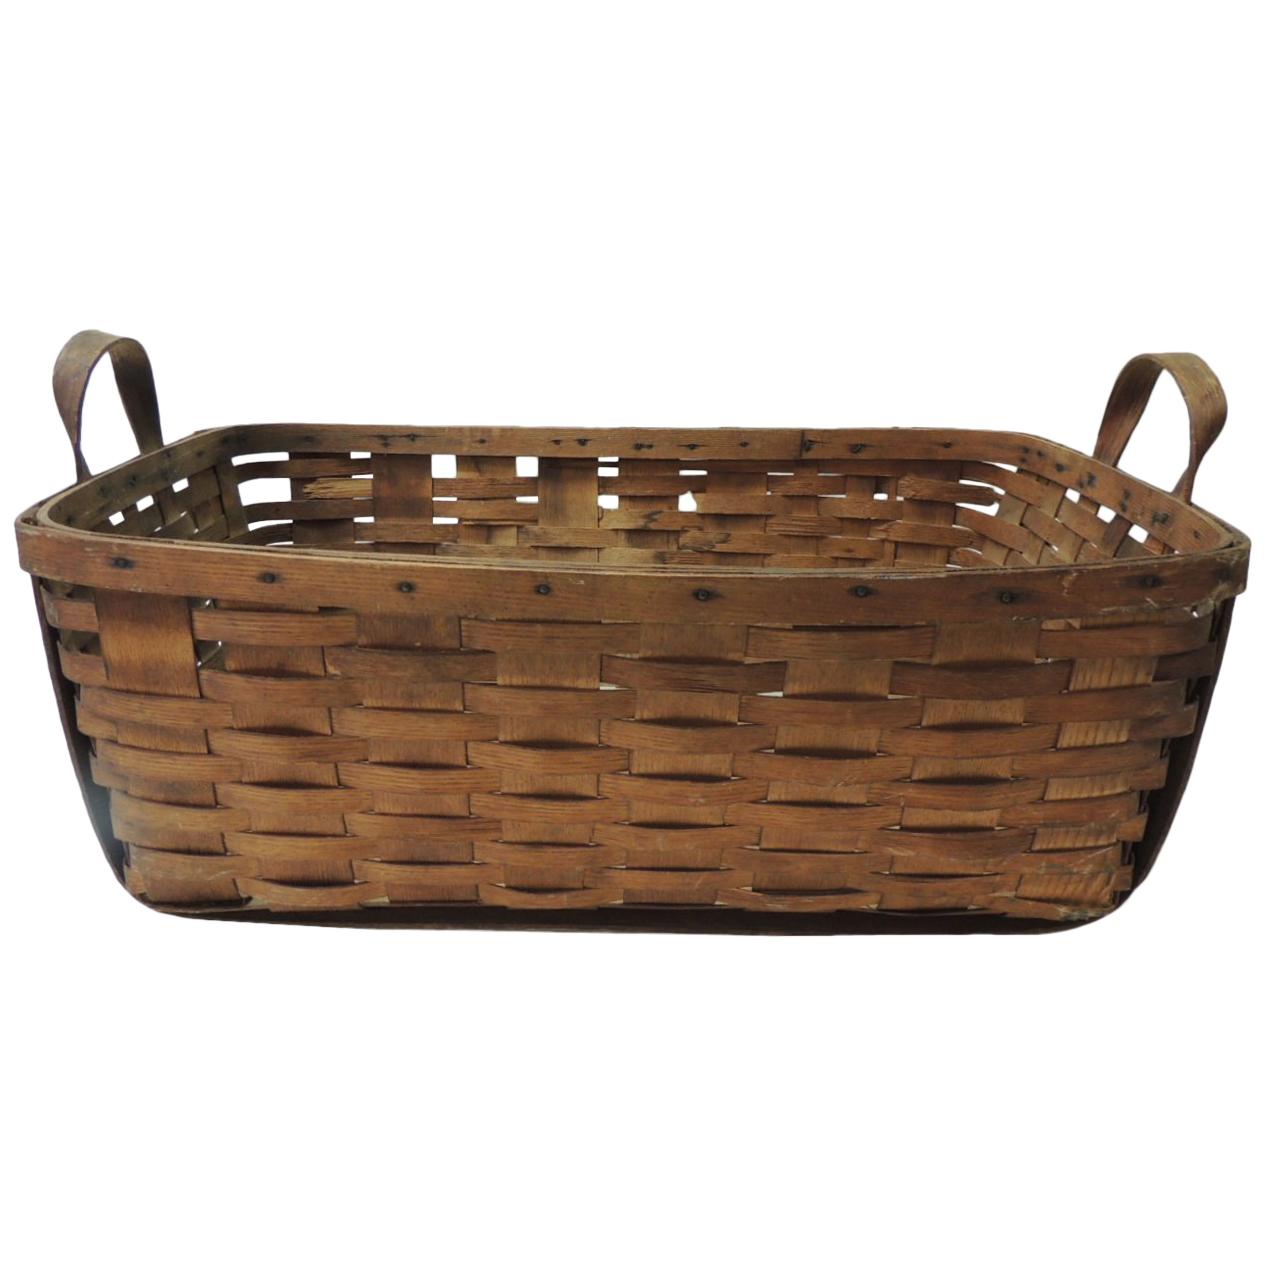 Antique Large Over-Size Wooden Flat-Woven Harvest Basket with Handles